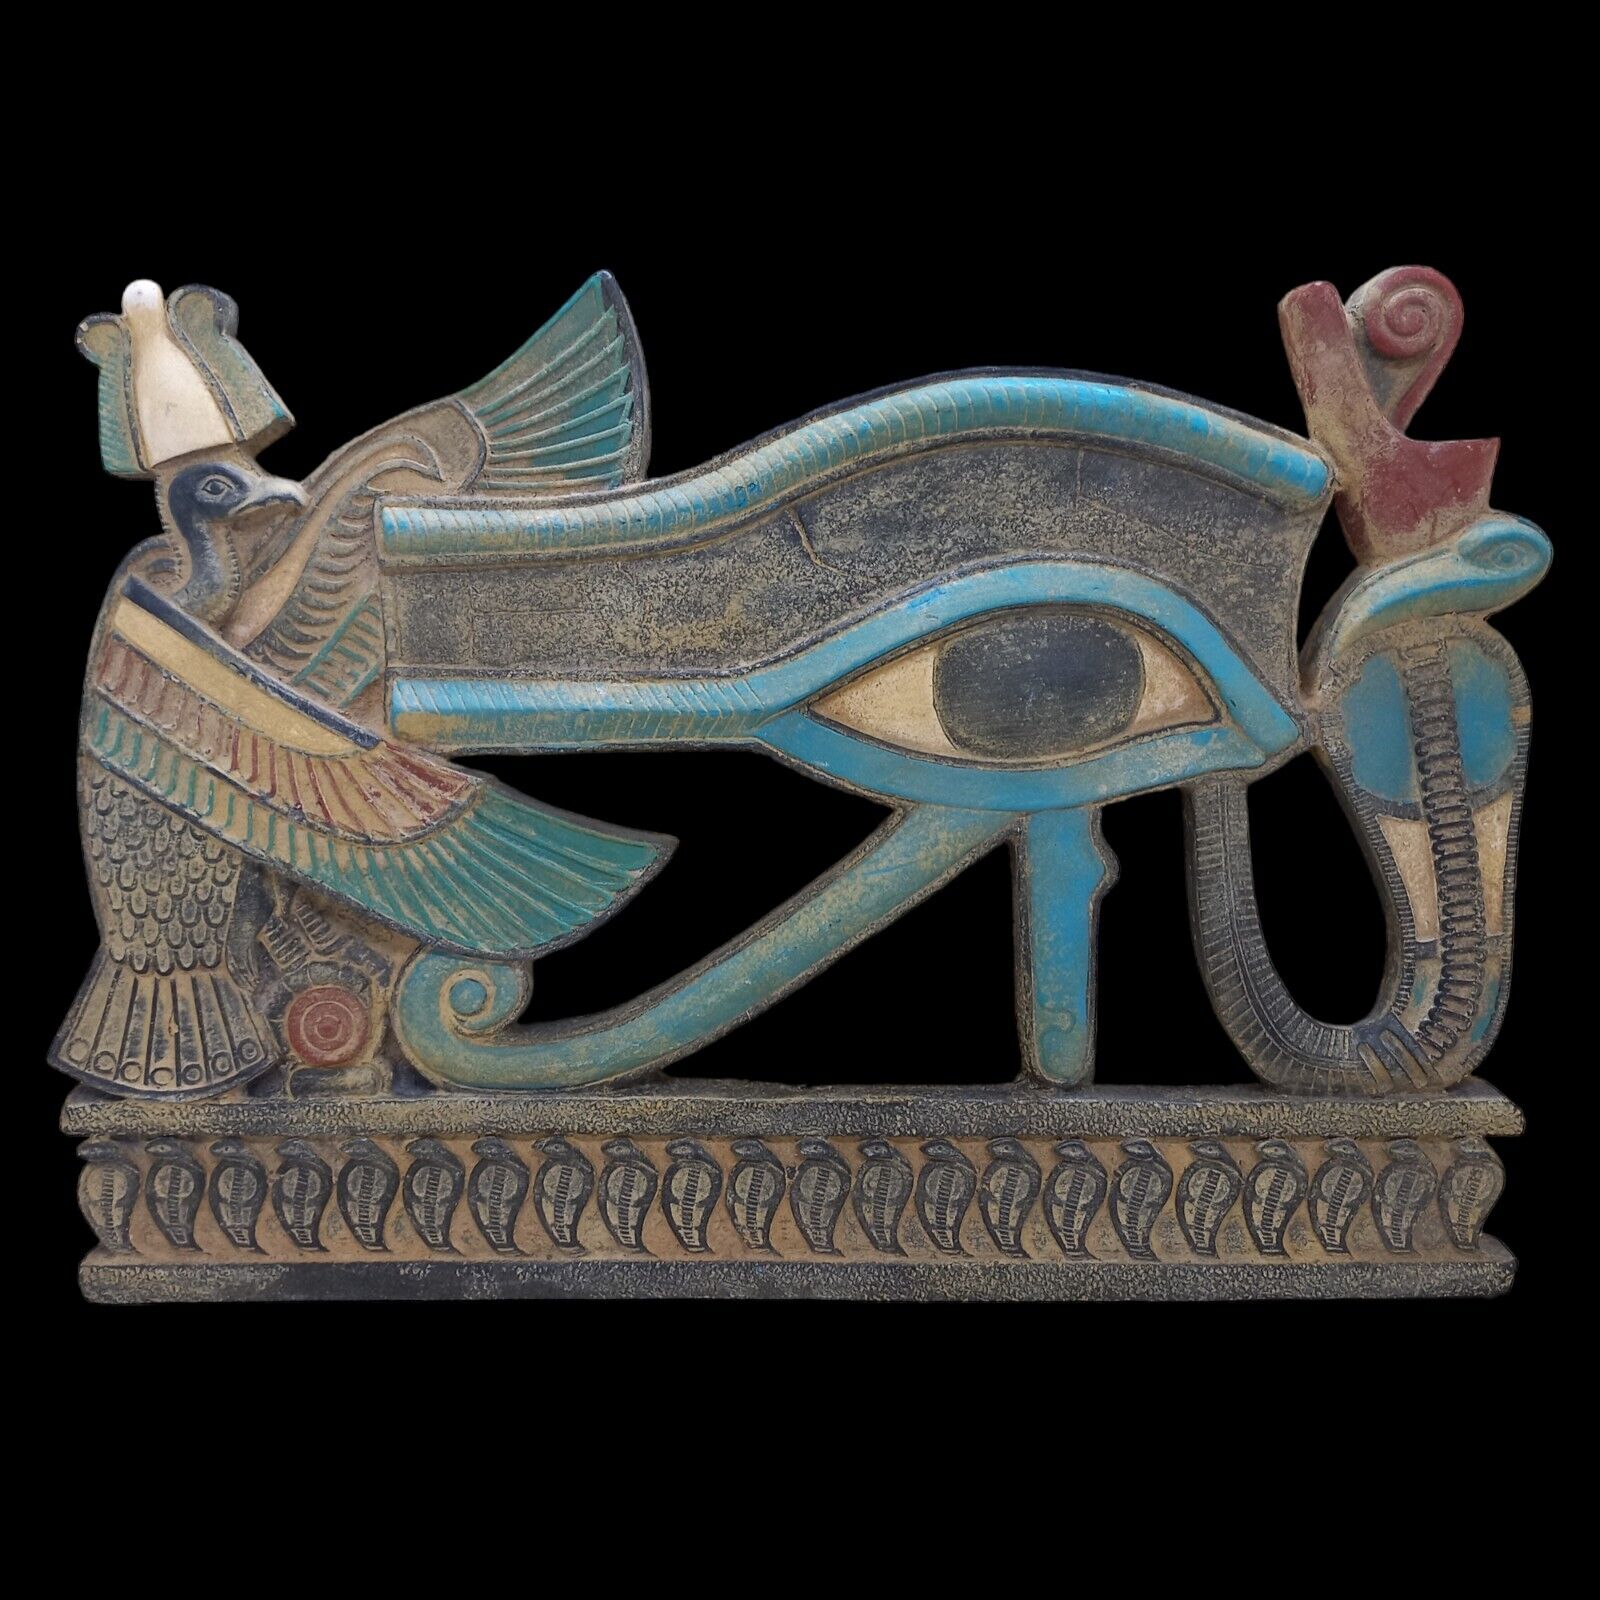 RARE ANCIENT EGYPTIAN ANTIQUE EYE OF HORUS WITH IBIS AND HOLLY COBRA STELLA